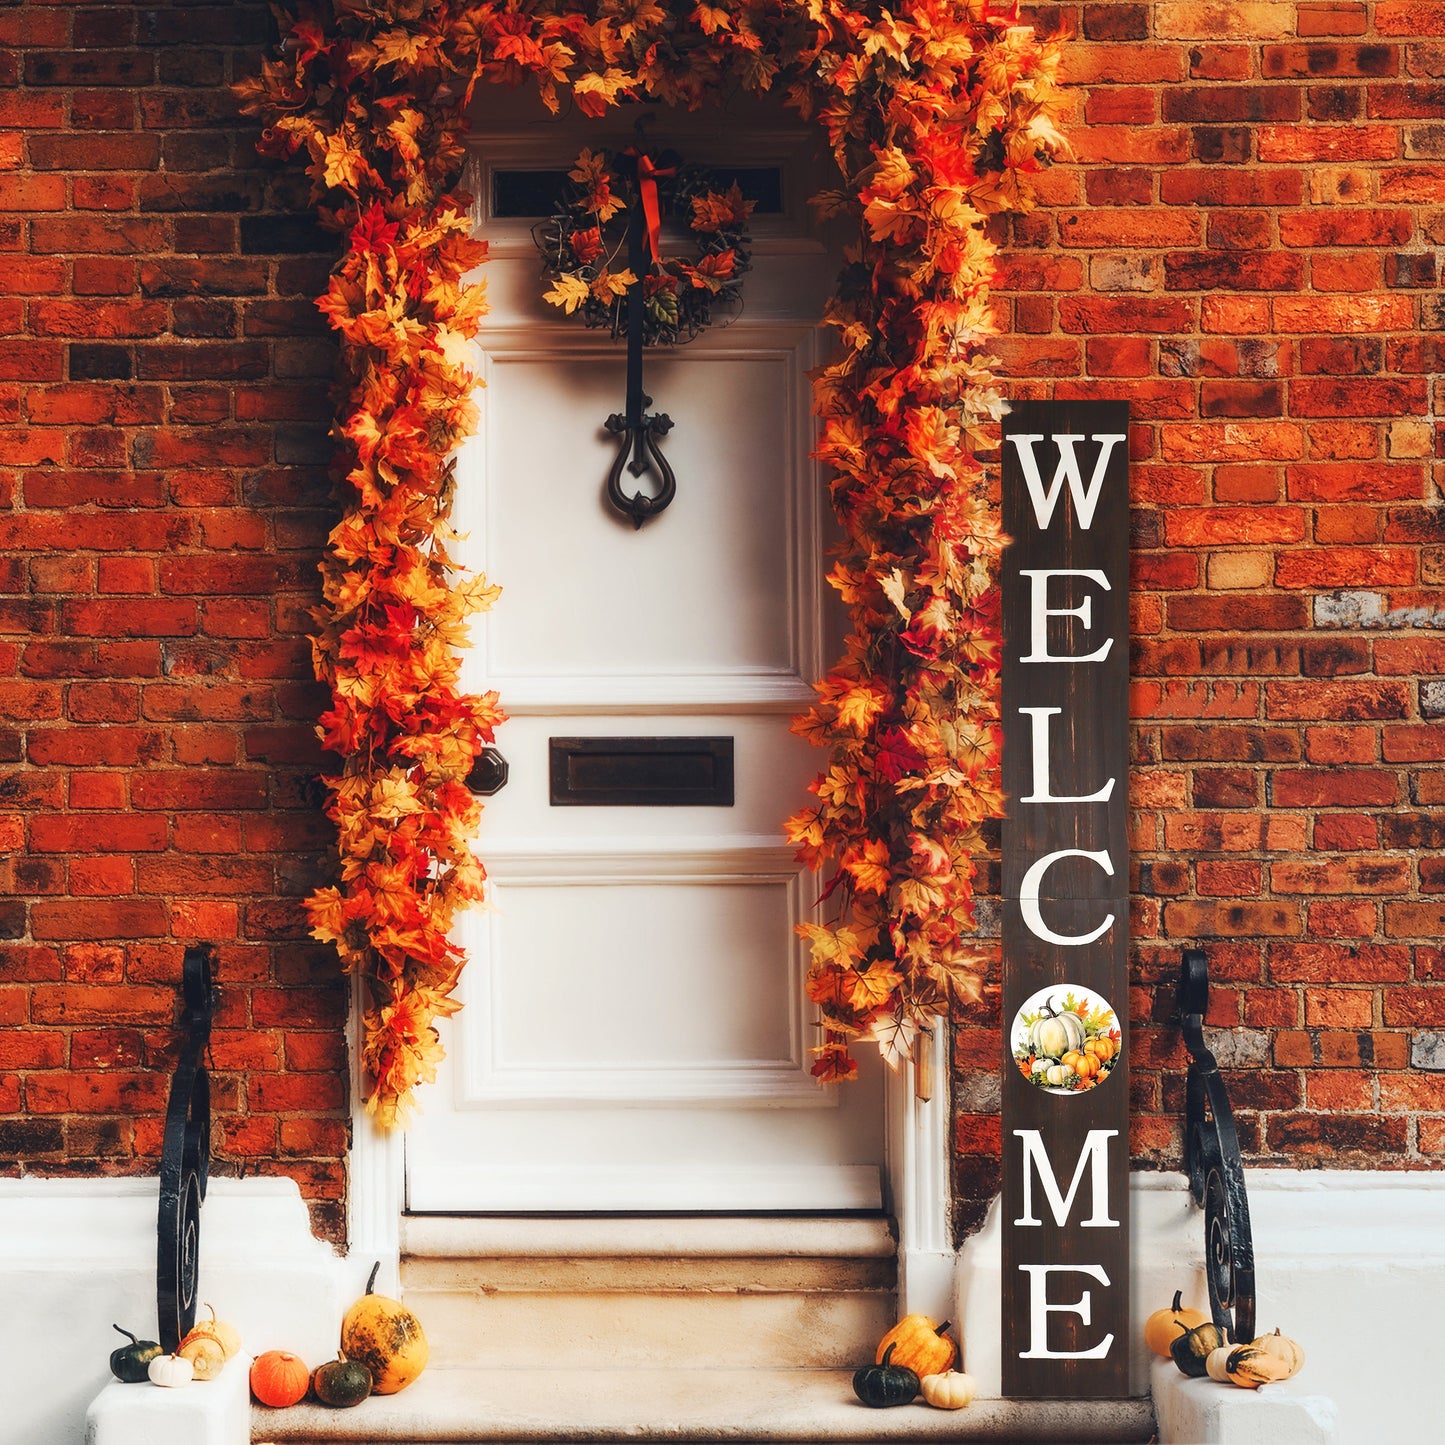 72in "Welcome" Fall Porch Sign with Pumpkins Design - Brown Porch Board Decor for Front Door during Autumn and Thanksgiving Celebrations